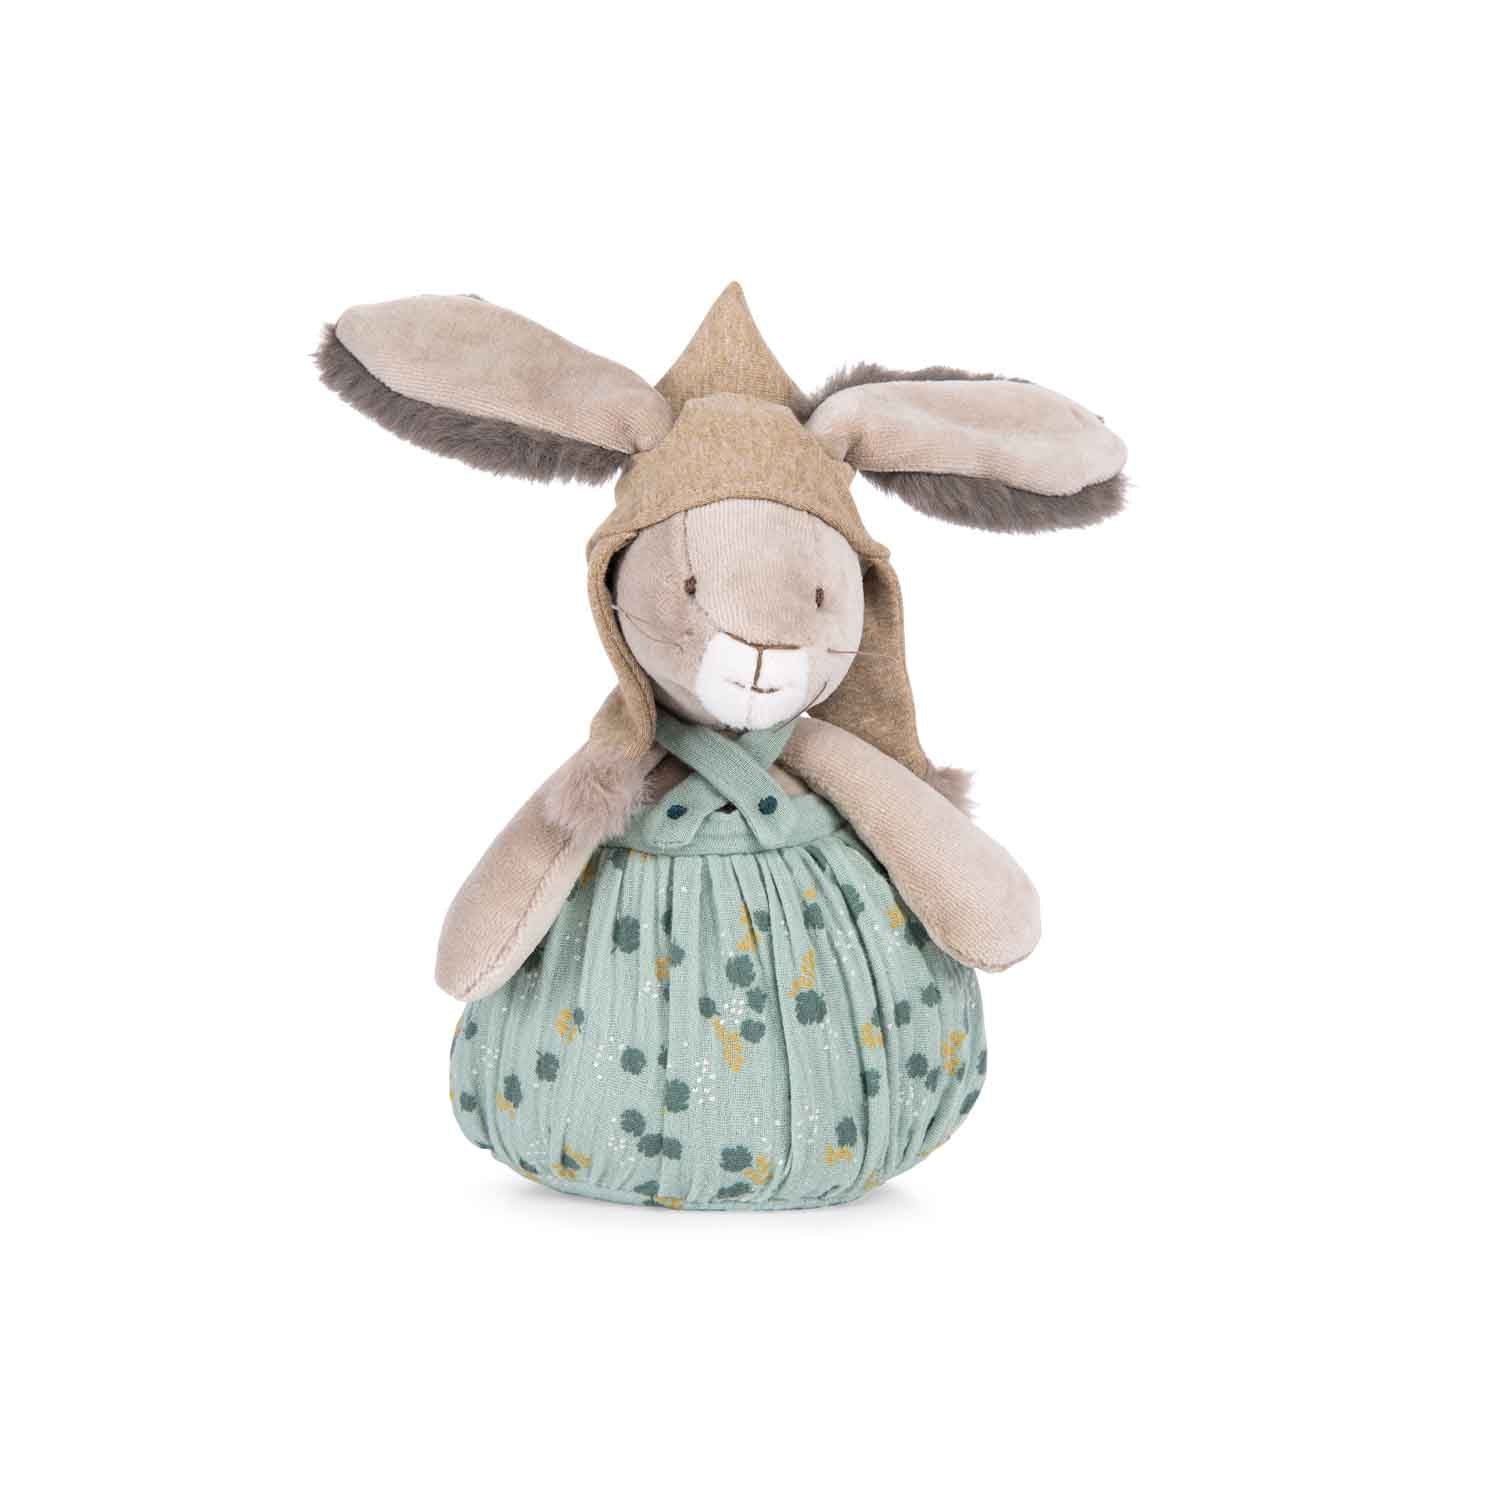 Trois Petits Lapins - Three Little Rabbits! Musical Bunny.